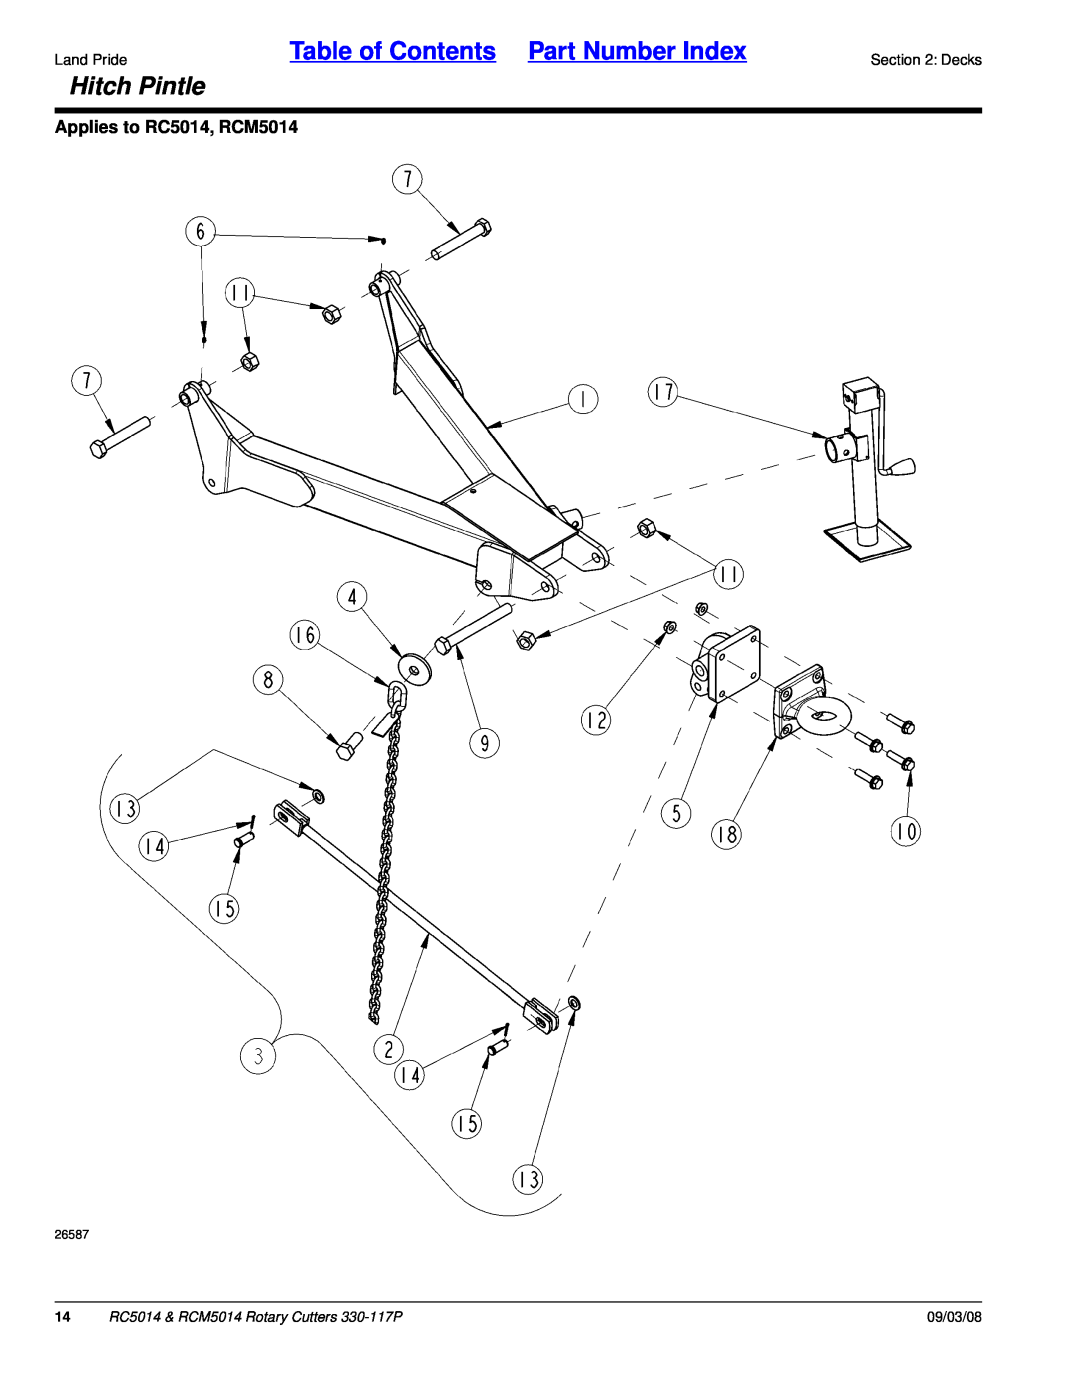 Land Pride manual Hitch Pintle, Table of Contents Part Number Index, Applies to RC5014, RCM5014, 09/03/08 